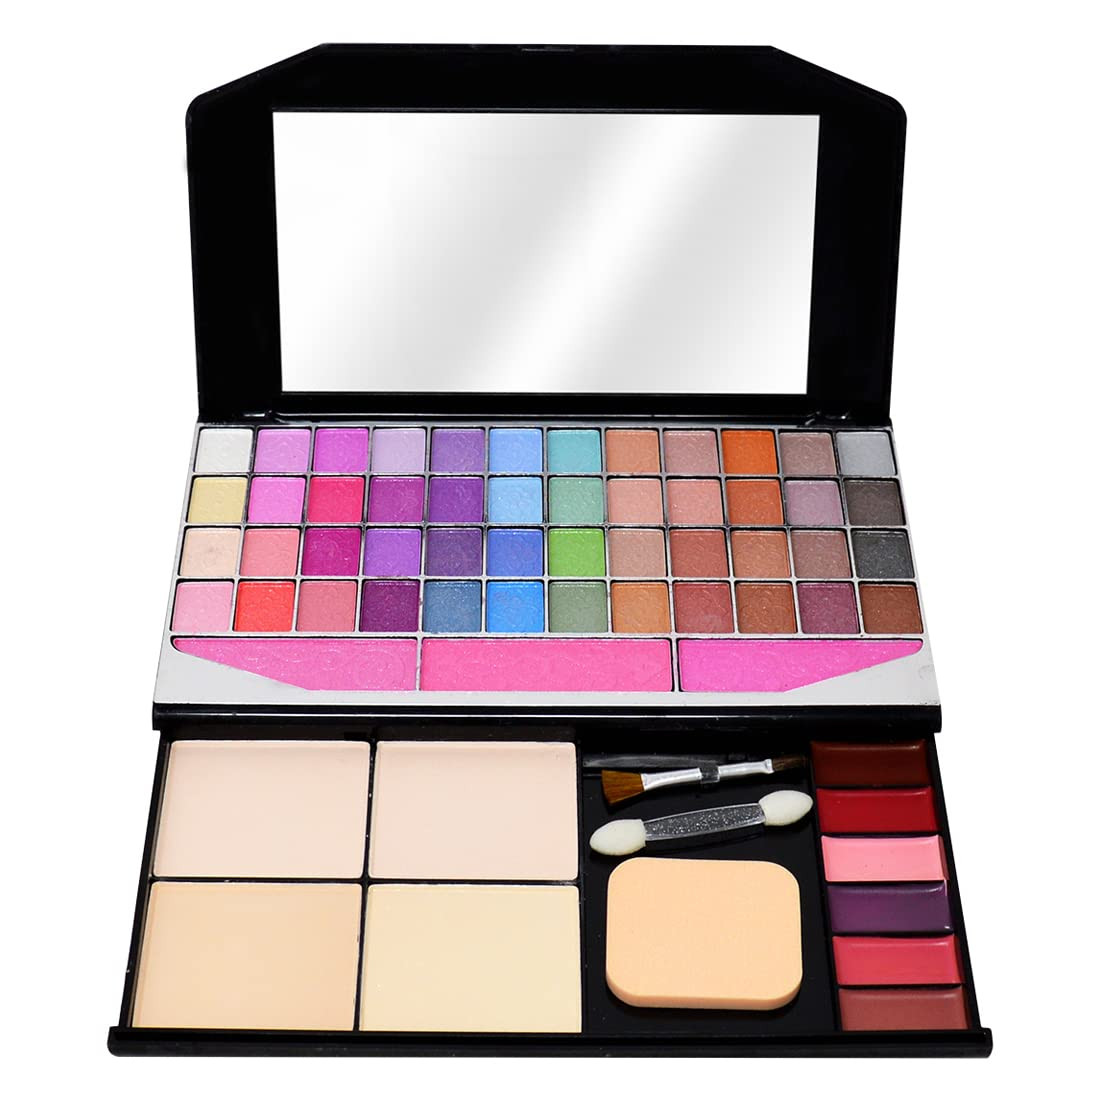 T.Y.A Good Choice India Fashion Makeup Kit For Women | 48 Eye Shadow, 3 Blusher, 4 Compact, 6 Lip Color, 1 Mirror,1 Puff | Easy-to-Blend, Long Lasting